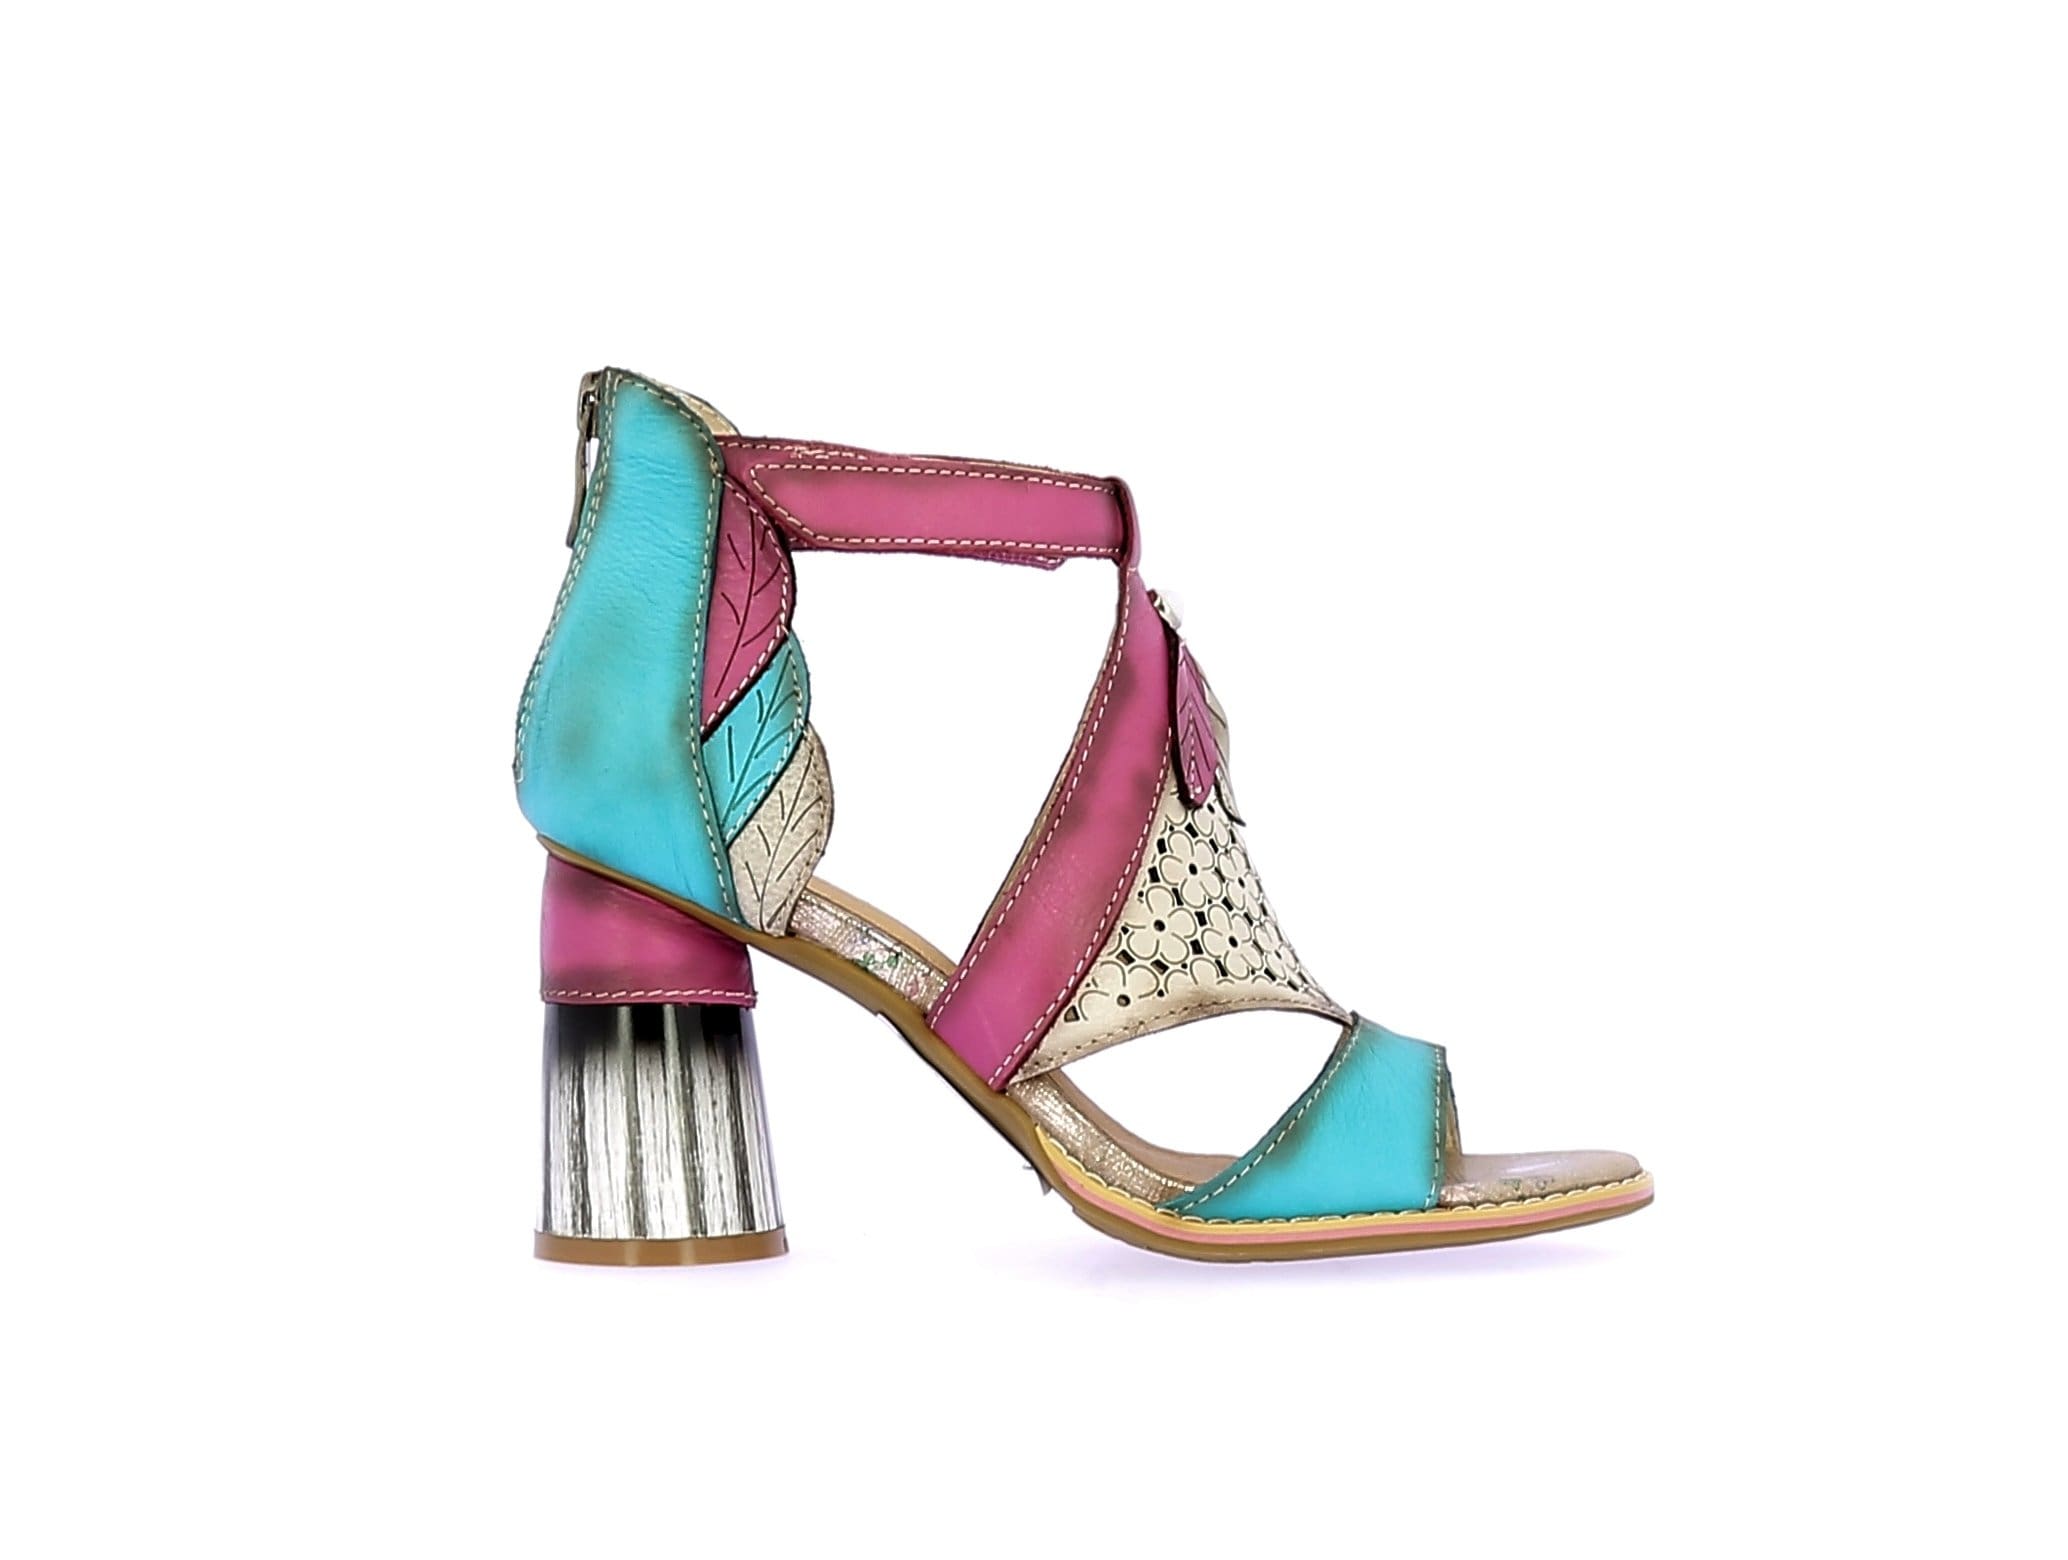 GUCSTOO 04 shoes - 35 / TURQUOISE - Sandal